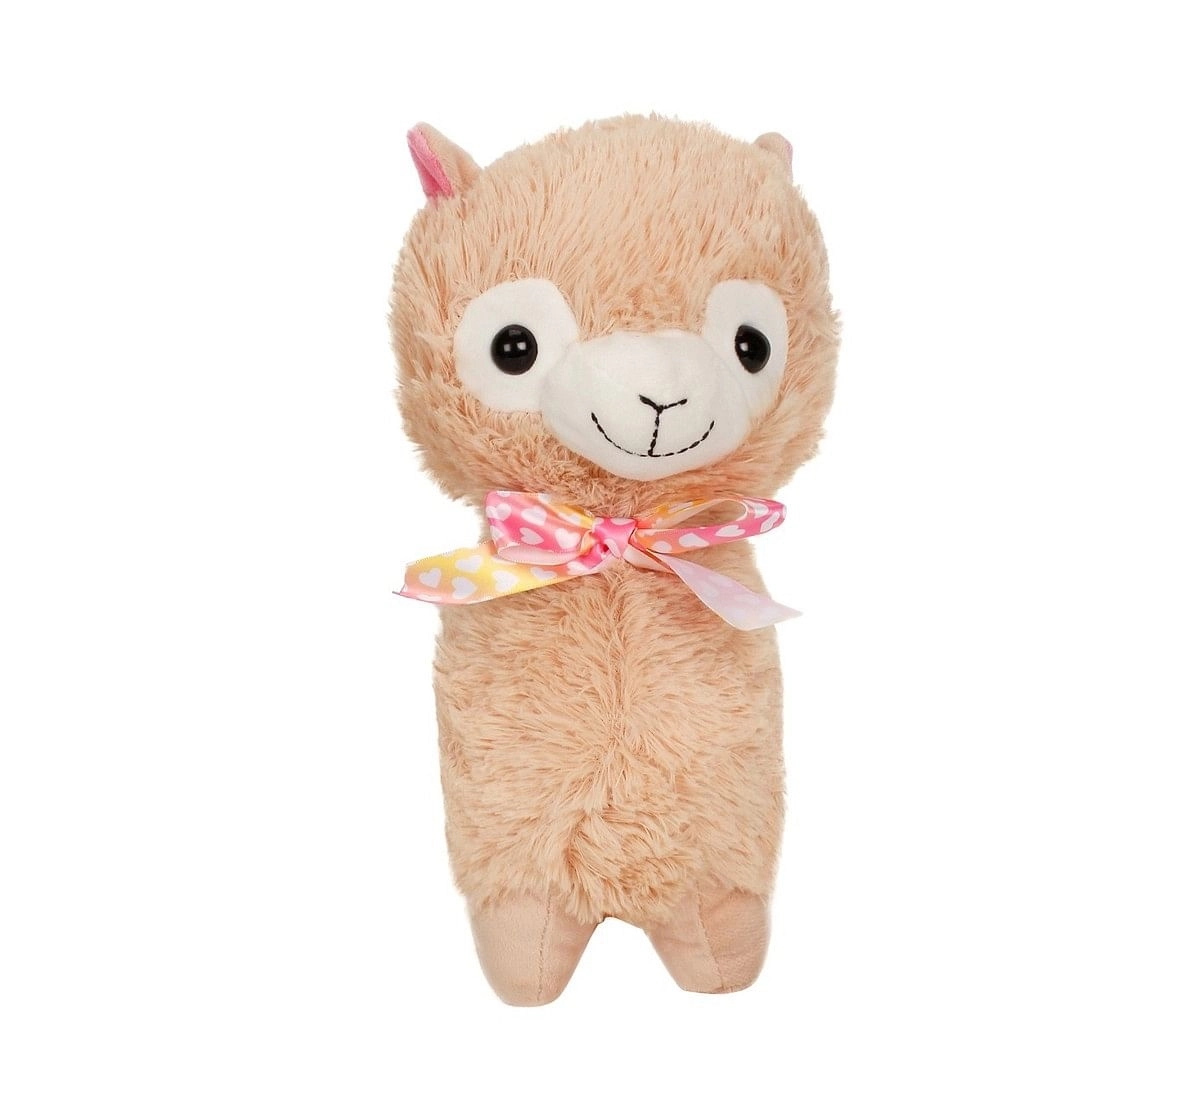 Fuzzbuzz Llama Stuffed Plush Toy - Brown - 33Cm Quirky Soft Toys for Kids age 0M+ - 33 Cm (Brown)